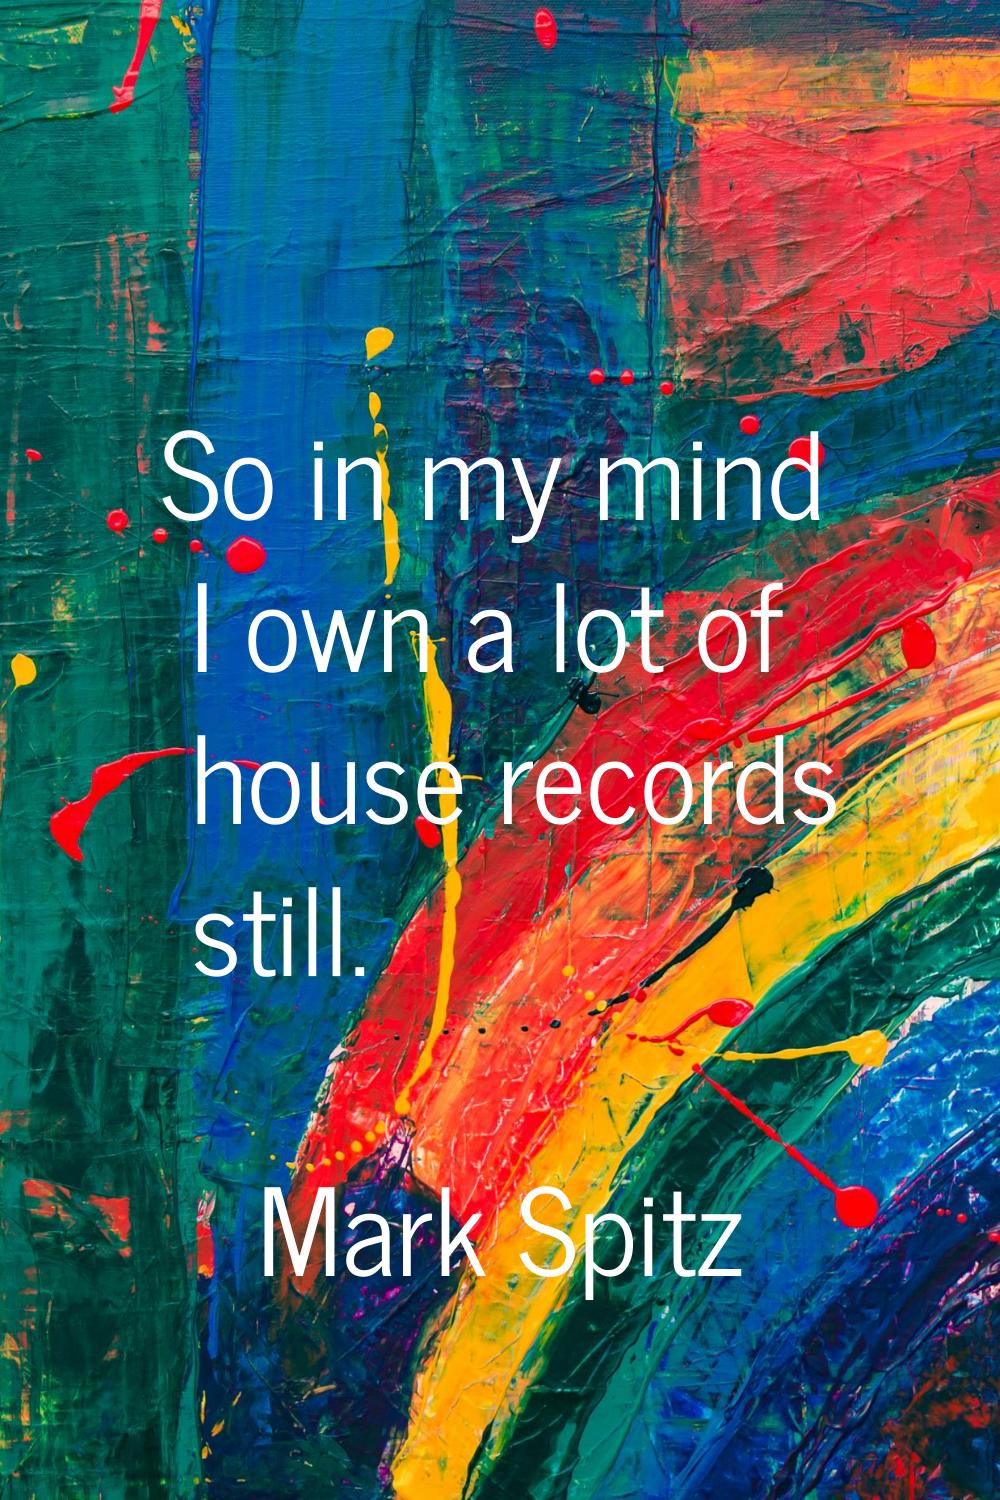 So in my mind I own a lot of house records still.